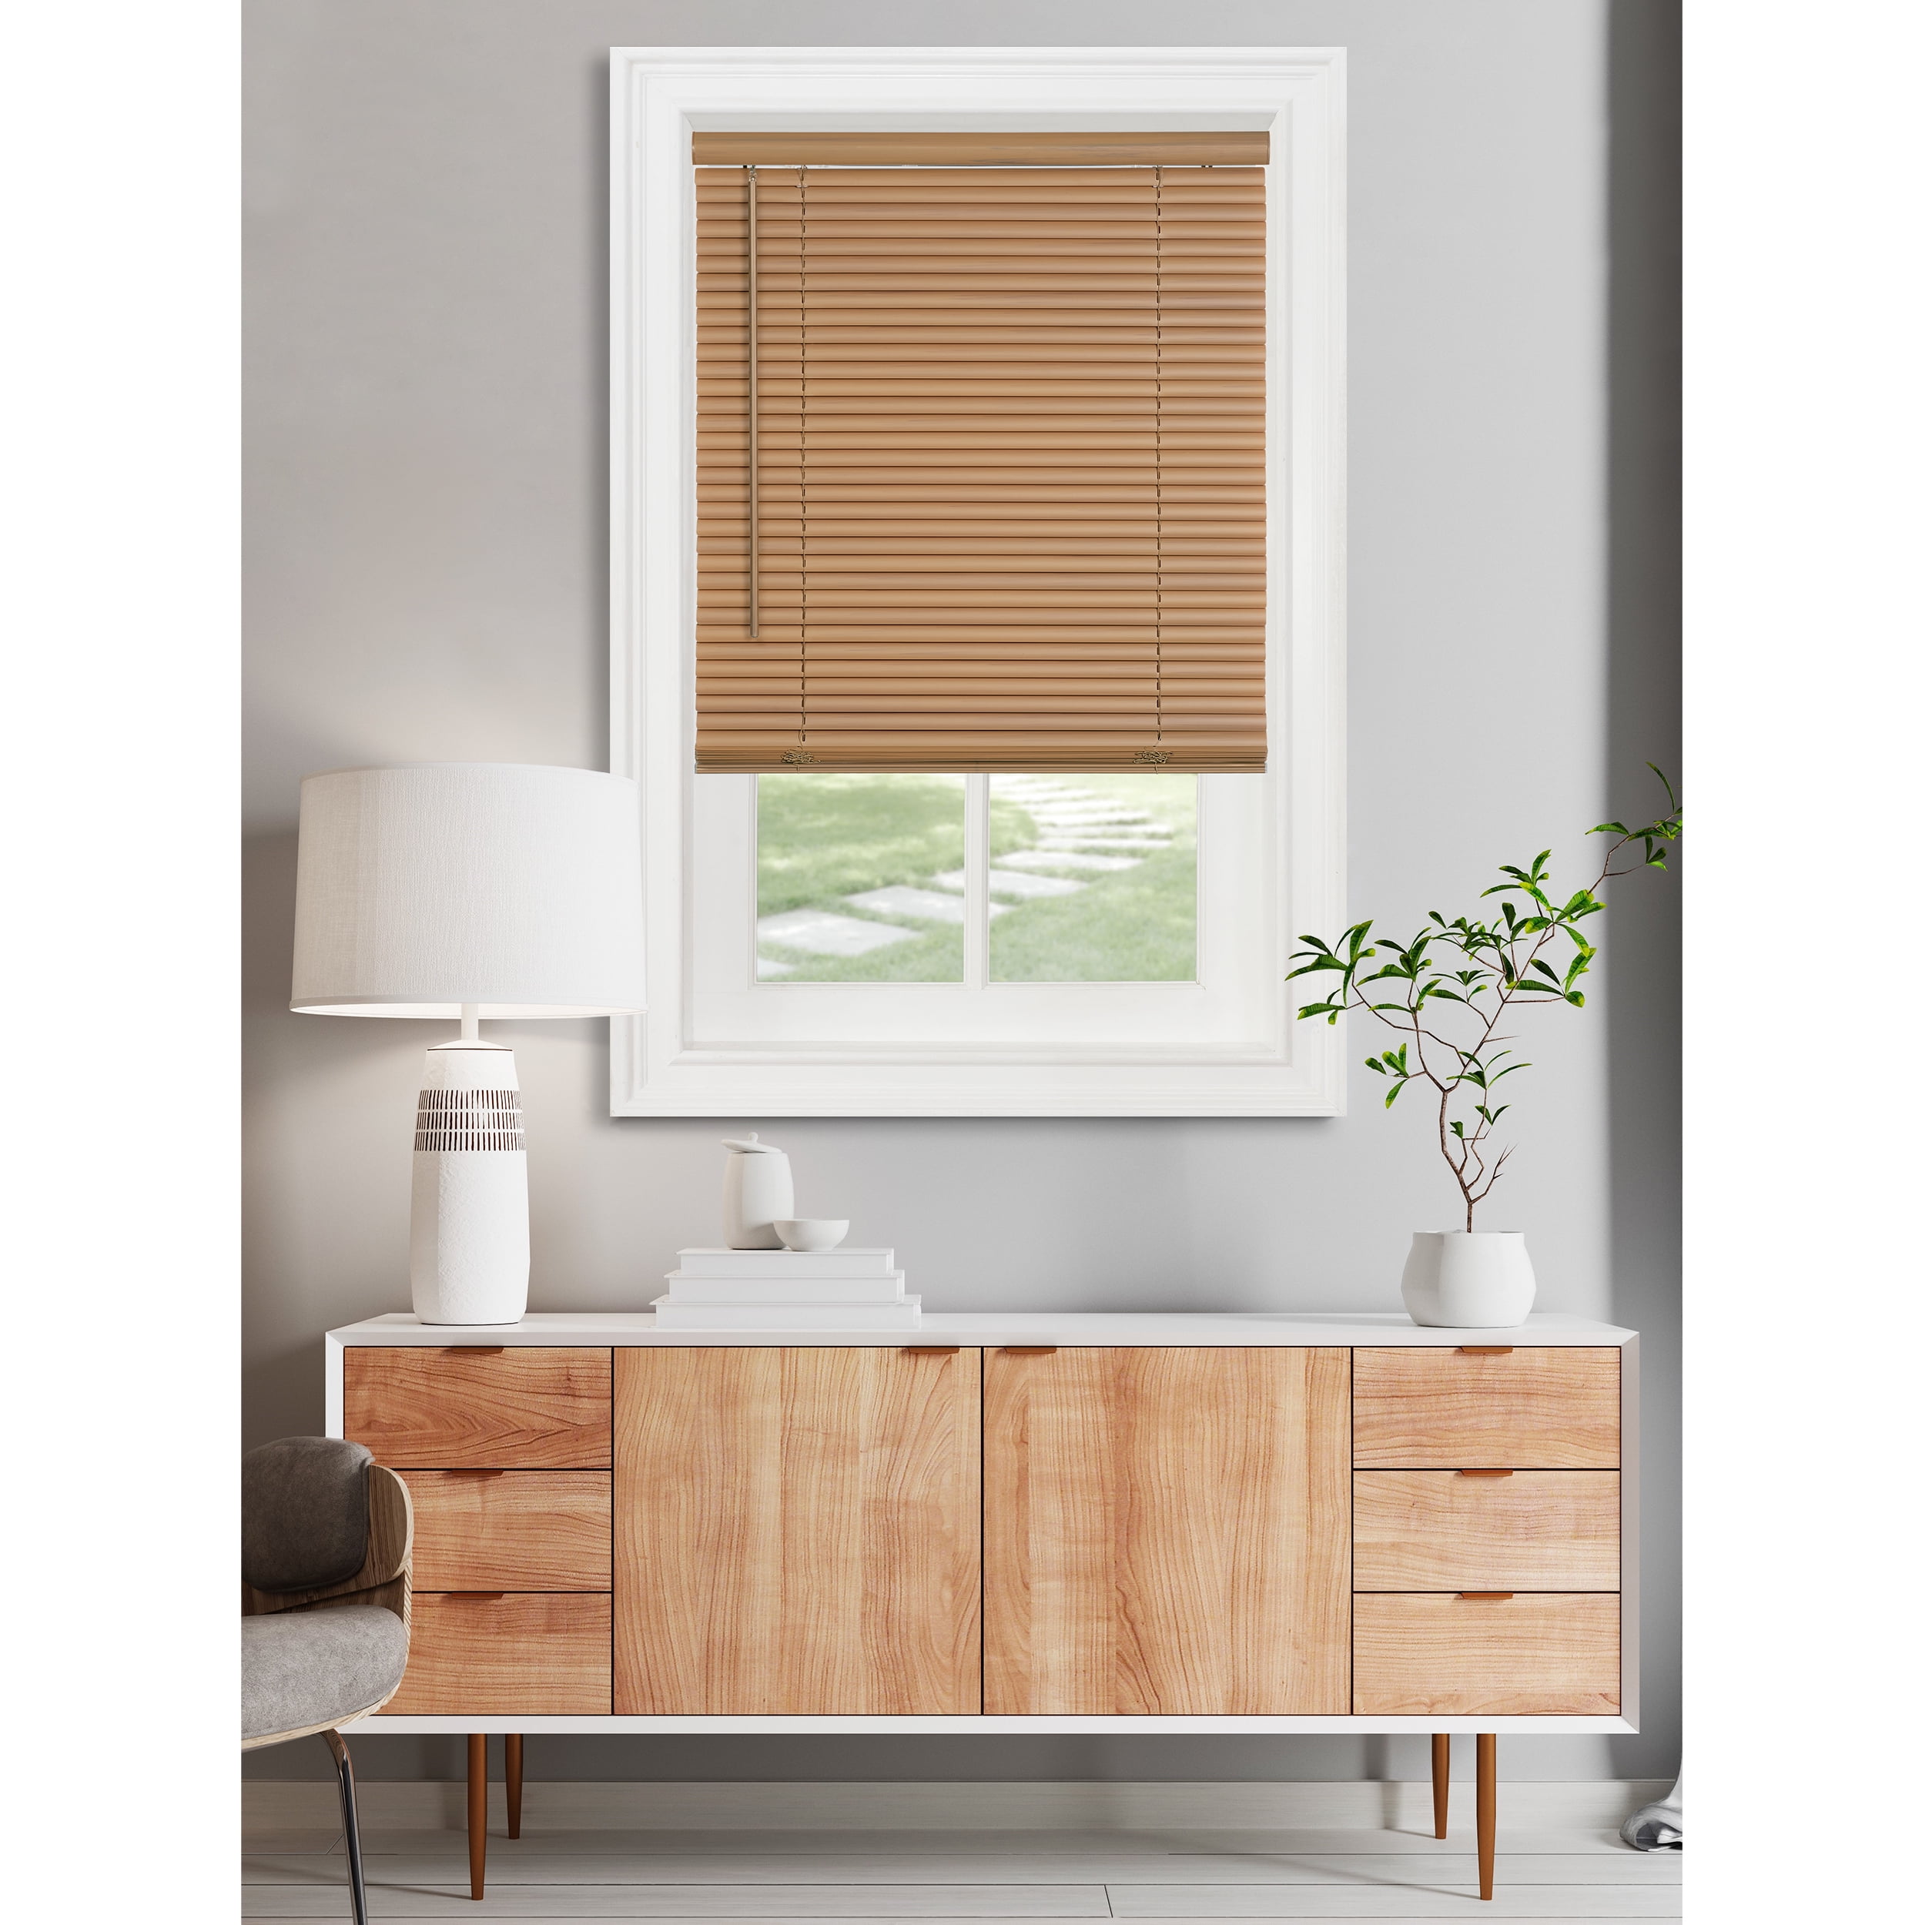 Picture of Achim MSG224WD06 24 x 64 in. Cordless GII Morningstar 1 in. Light Filtering Mini Blind - Woodtone